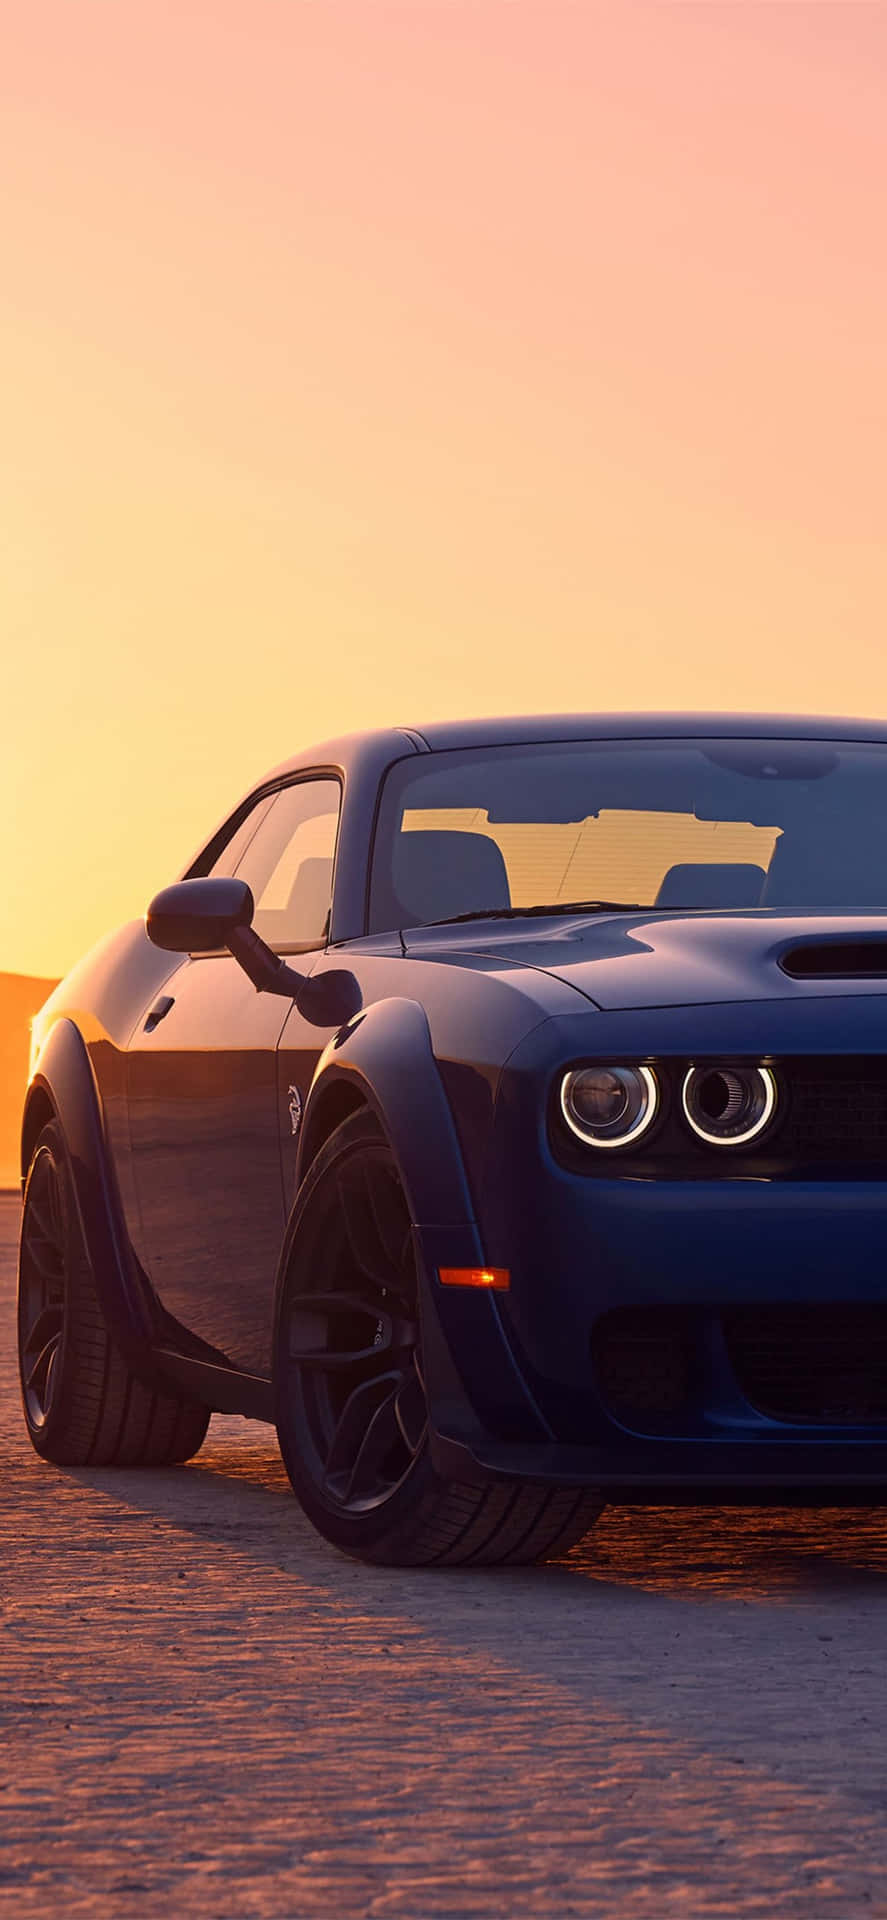 Get the latest Hellcat inspired iPhone models Wallpaper